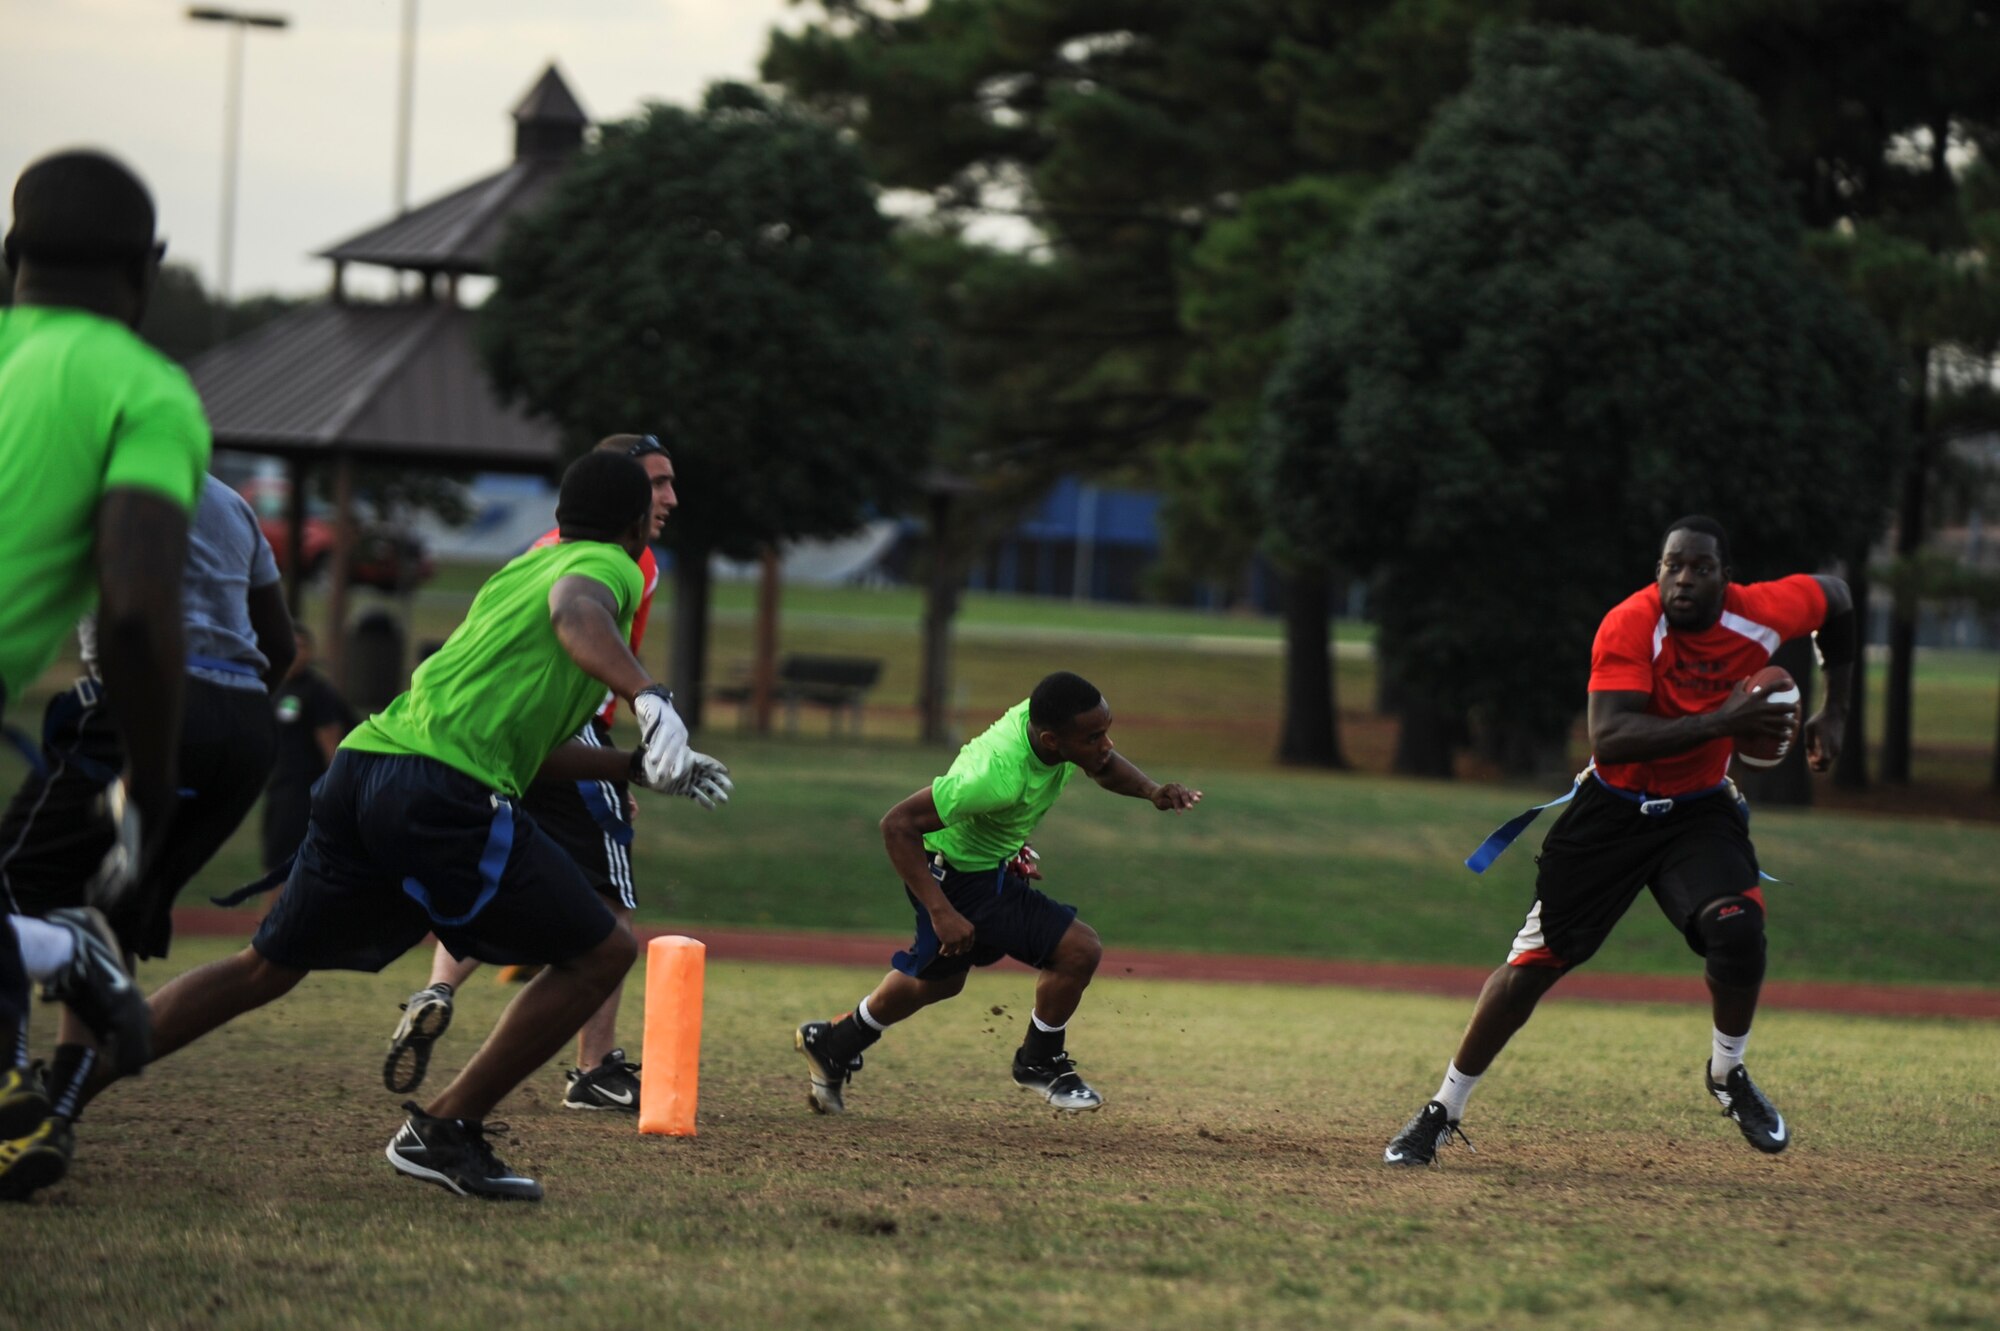 Senior Airman Ernest Opoku quarterback for the 19th Civil Engineer Squadron, scrambles out of the pocket during an intramural flag football game Oct. 9, 2014, at Little Rock Air Force Base, Ark. The 19th CES went on to lose 19-6. (U.S. Air Force photo by Airman 1st Class Cliffton Dolezal)